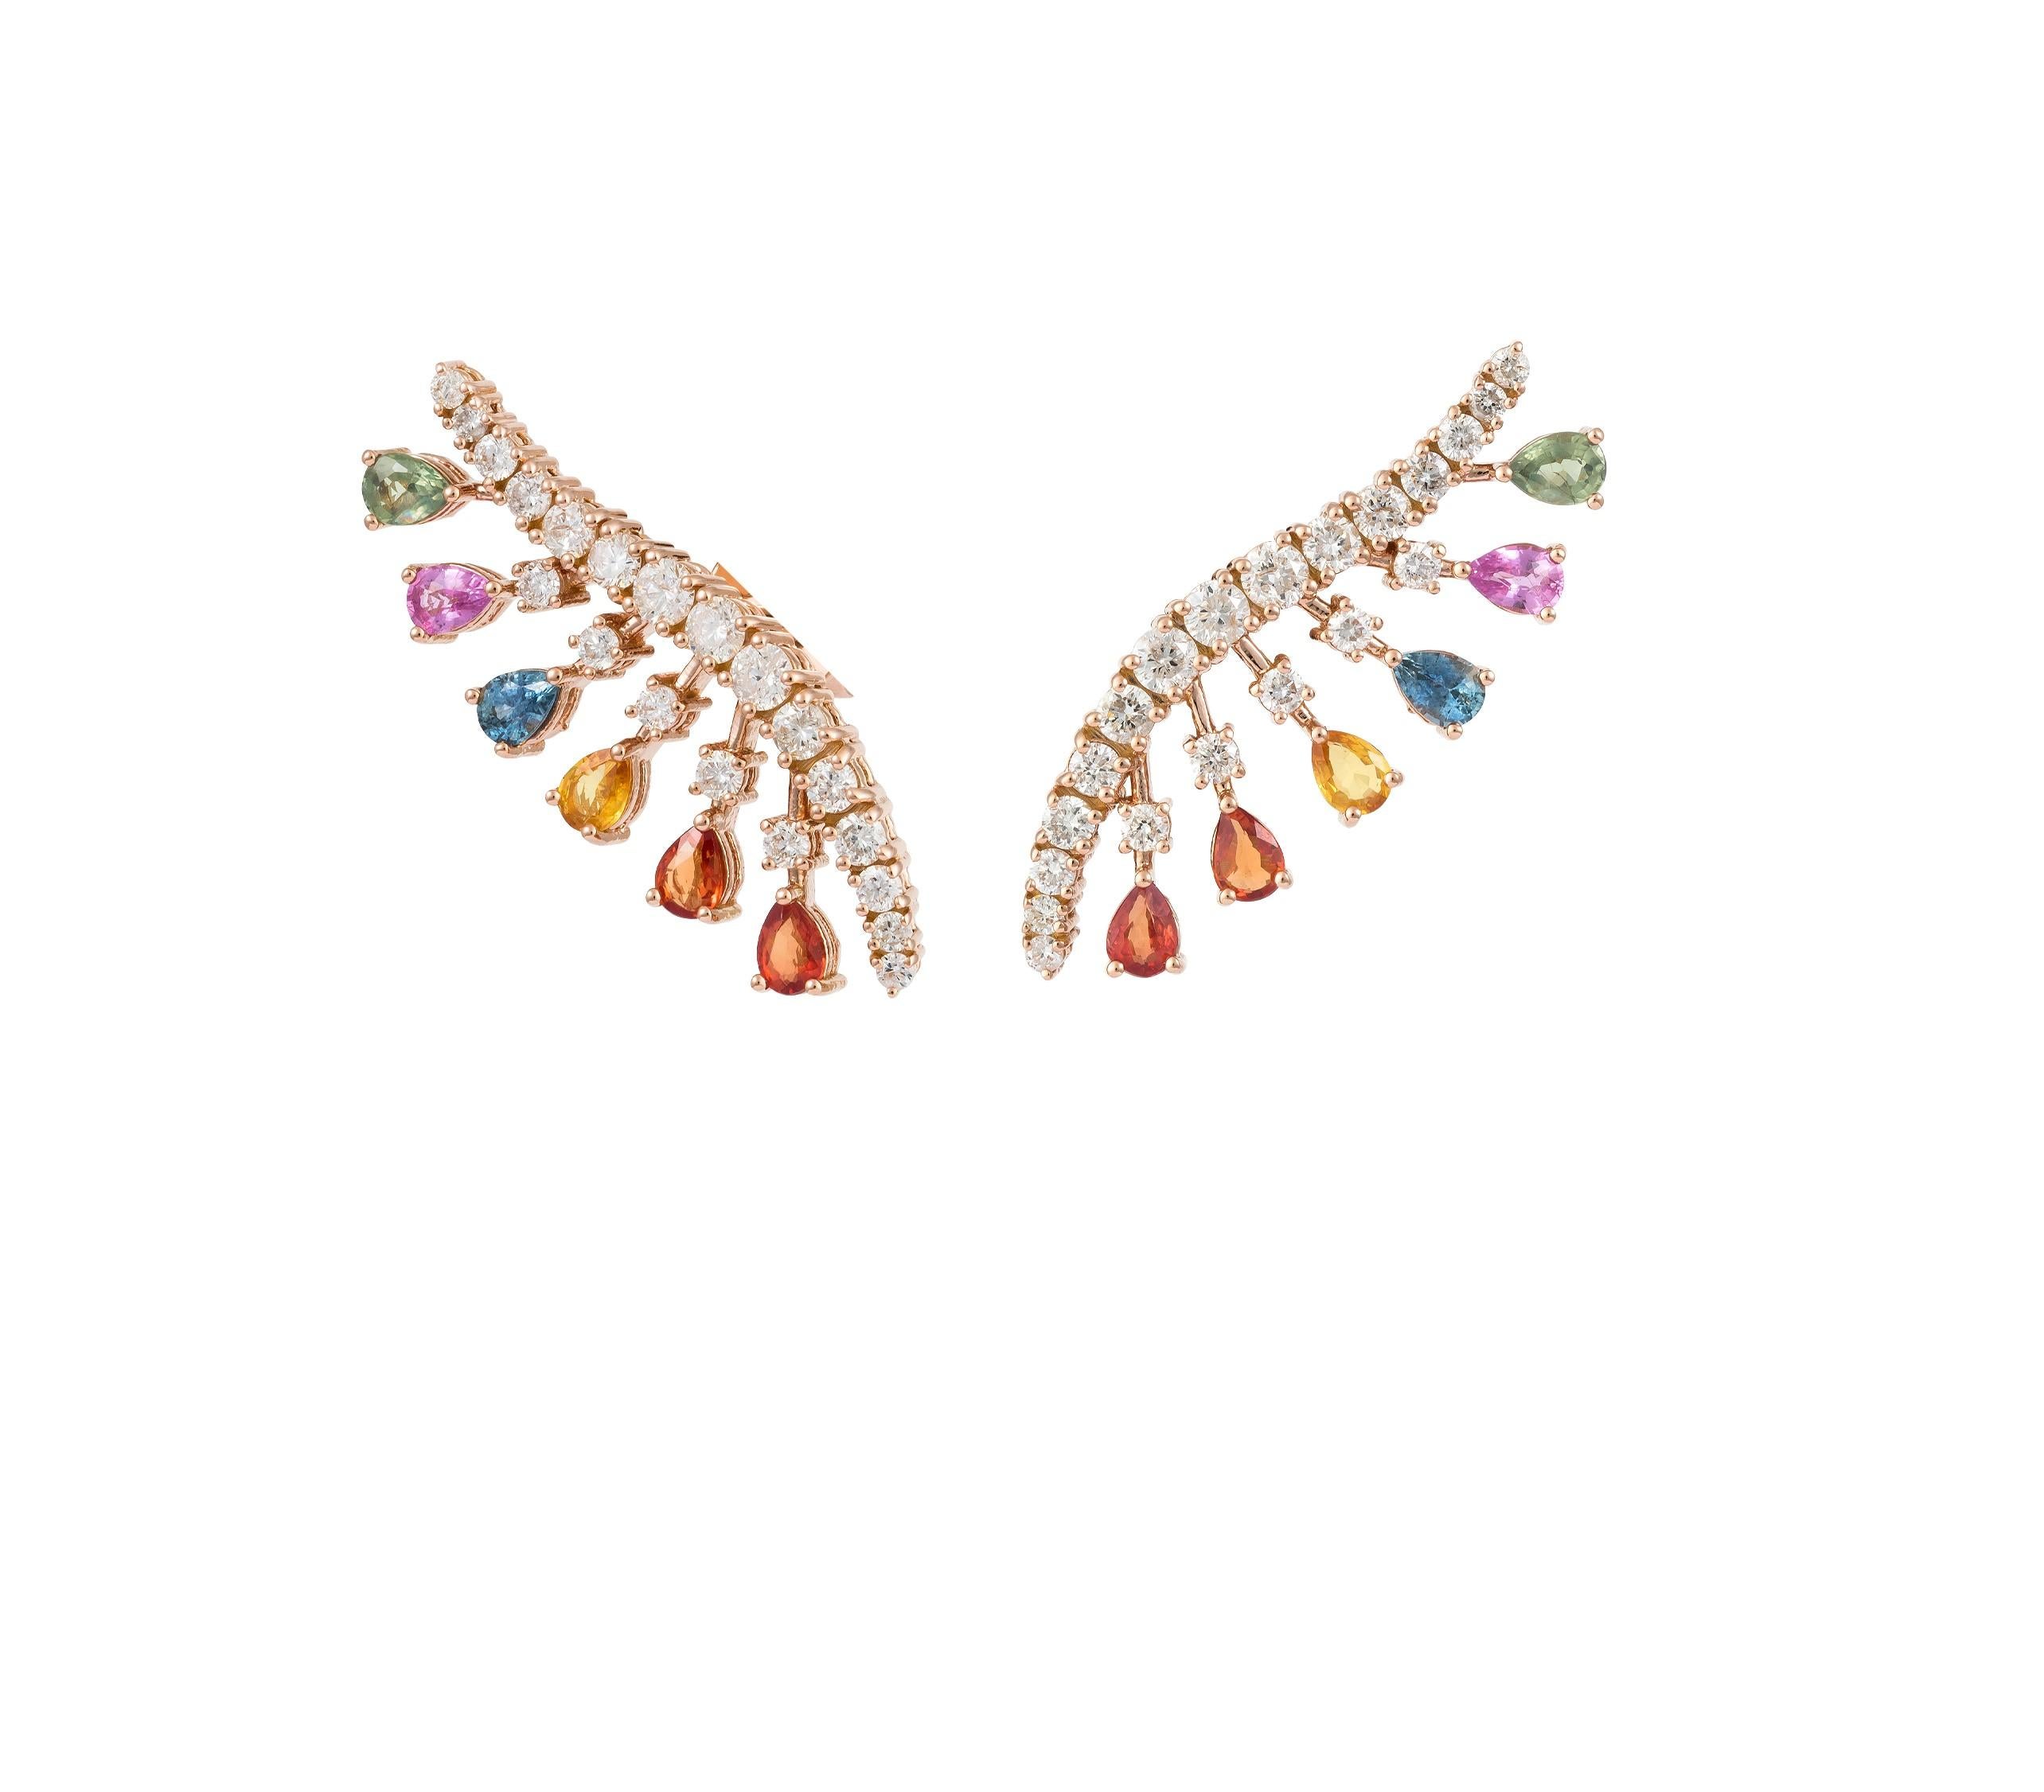 The Following Item we are offering is a Rare Important Radiant 18KT Gold Pair of Large Rare Gorgeous Multi Rainbow Sapphire and Diamond Earrings. Earrings are comprised of Beautiful Glittering Rare Colorful Sapphires and Glittering Diamonds T.C.W.